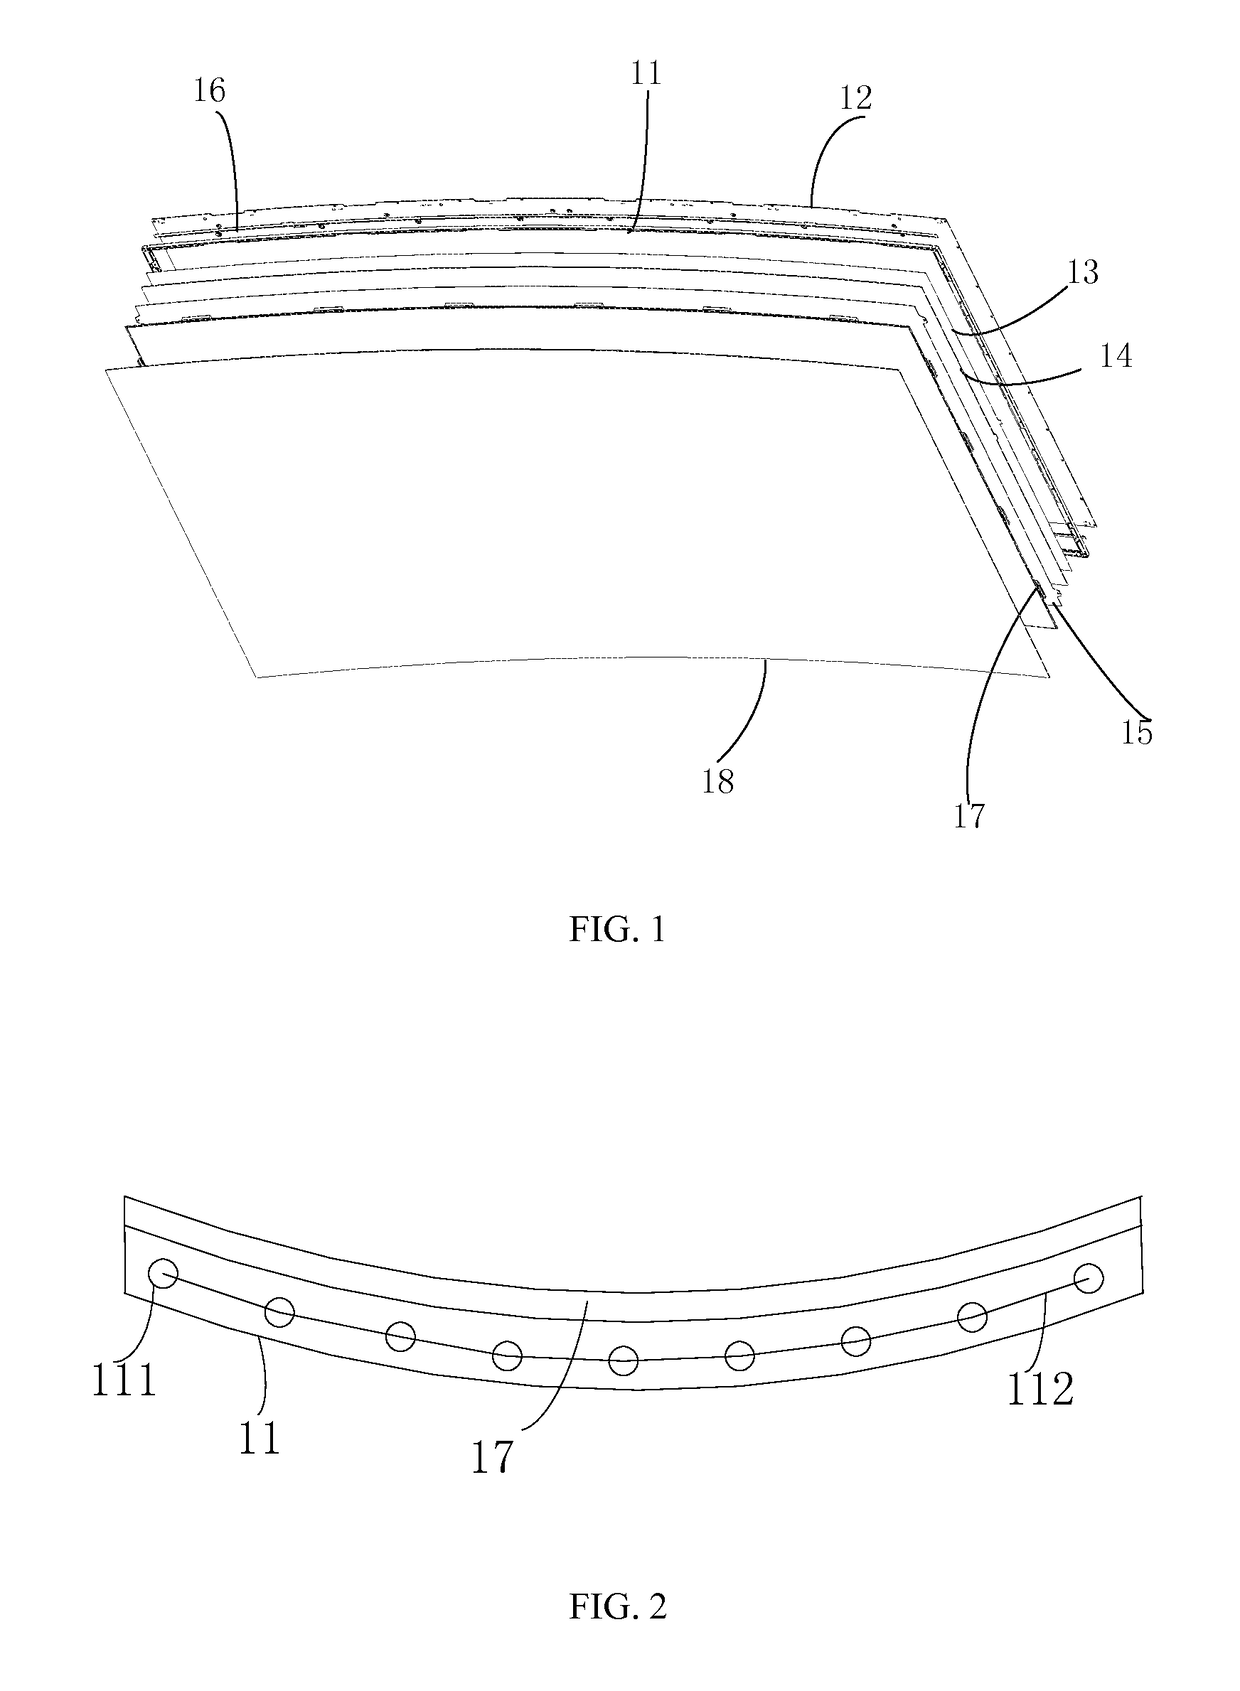 Curved display device